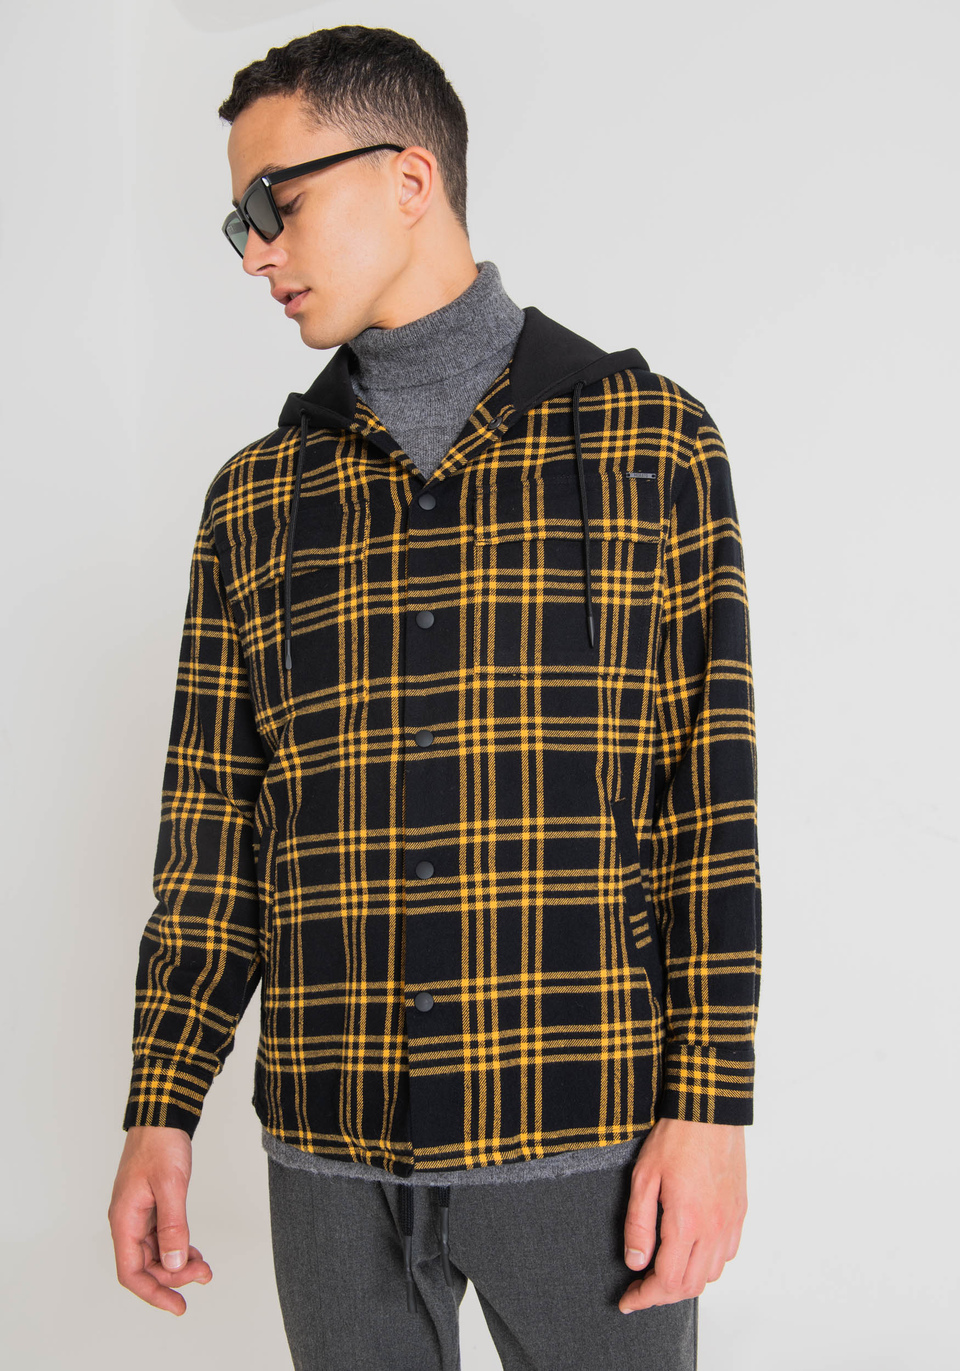 OVERSIZE SHIRT IN PURE COTTON TWILL WITH HOOD - Antony Morato Online Shop